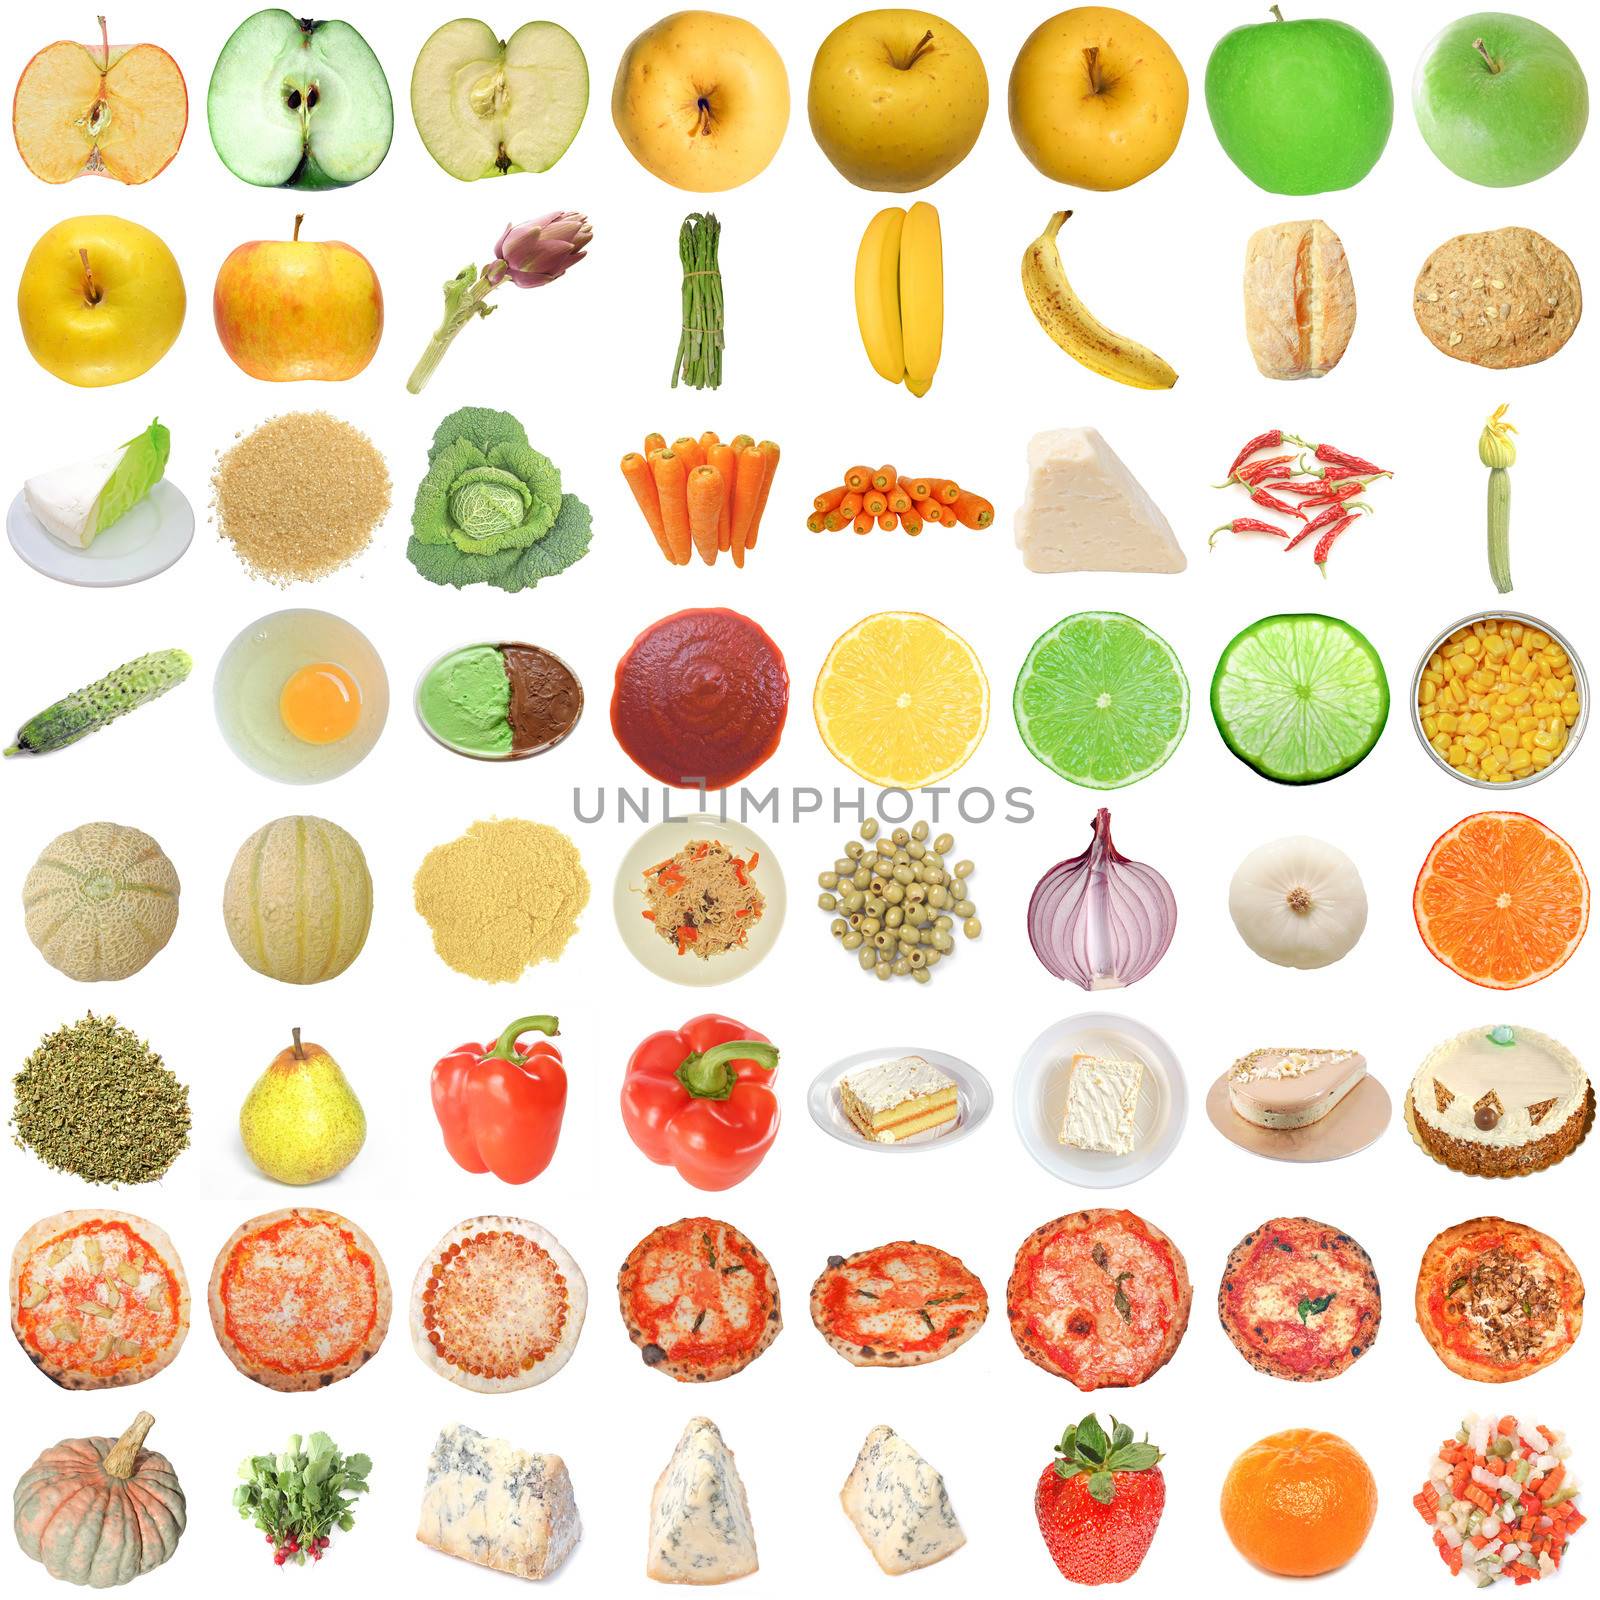 Food collage set of many vegetarian items isolated over white including fruits vegetables and pizza